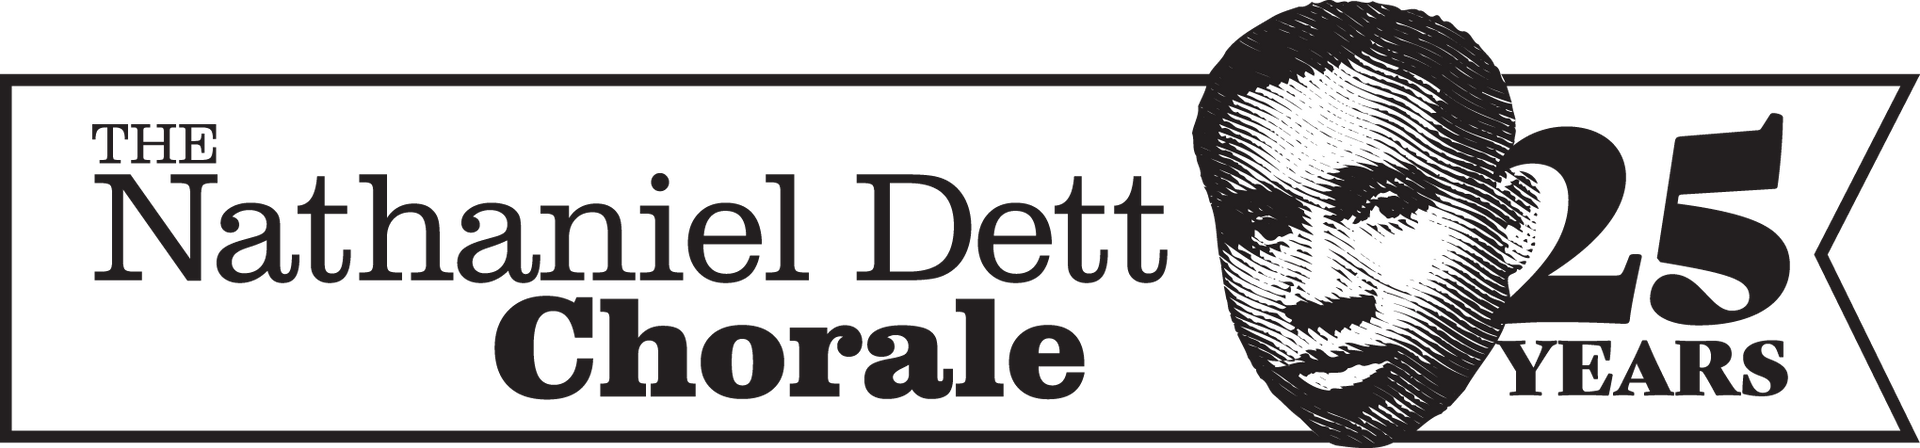 A black and white logo for the nathaniel dett chorale